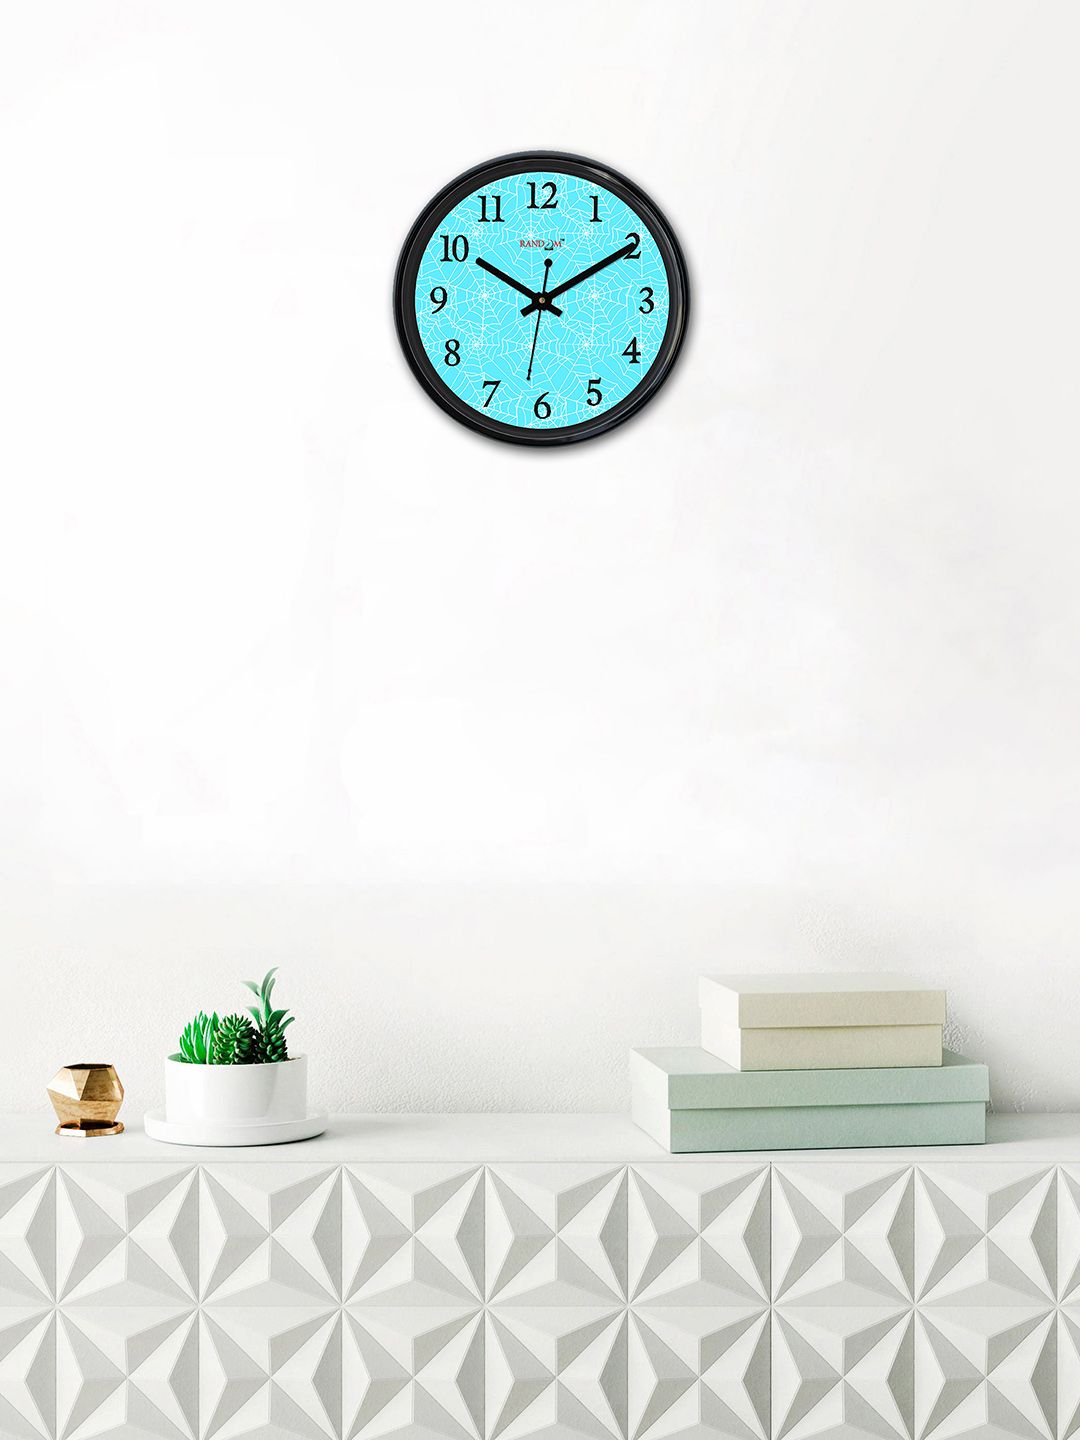 RANDOM Turquoise Blue & Black Round Printed Analogue Wall Clock Price in India